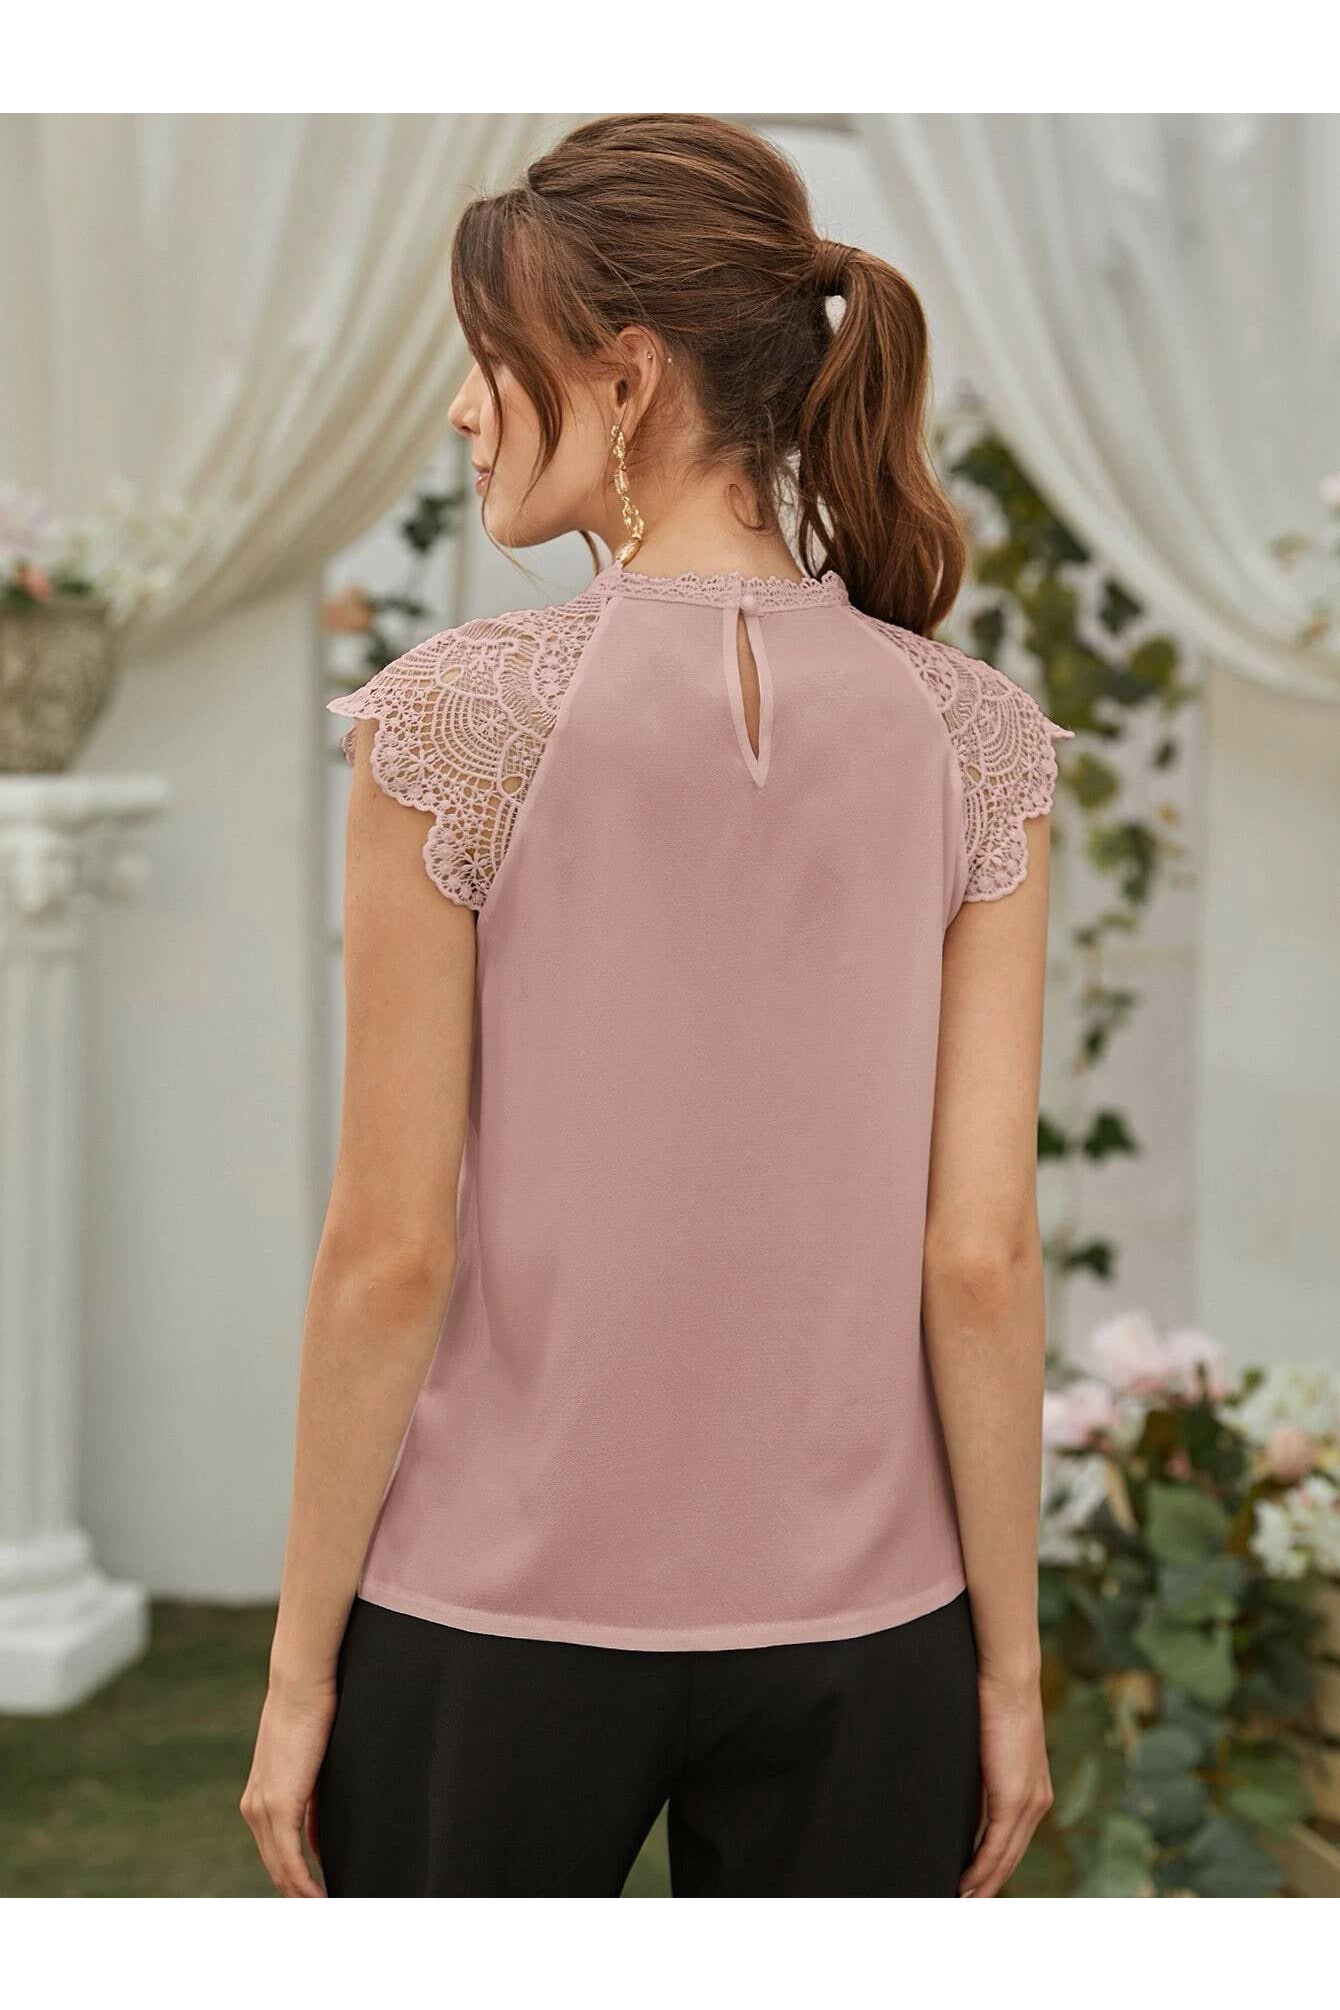 Shein Emery Rose Contrast Guipure Lace Ruffle Sleeve Blouse